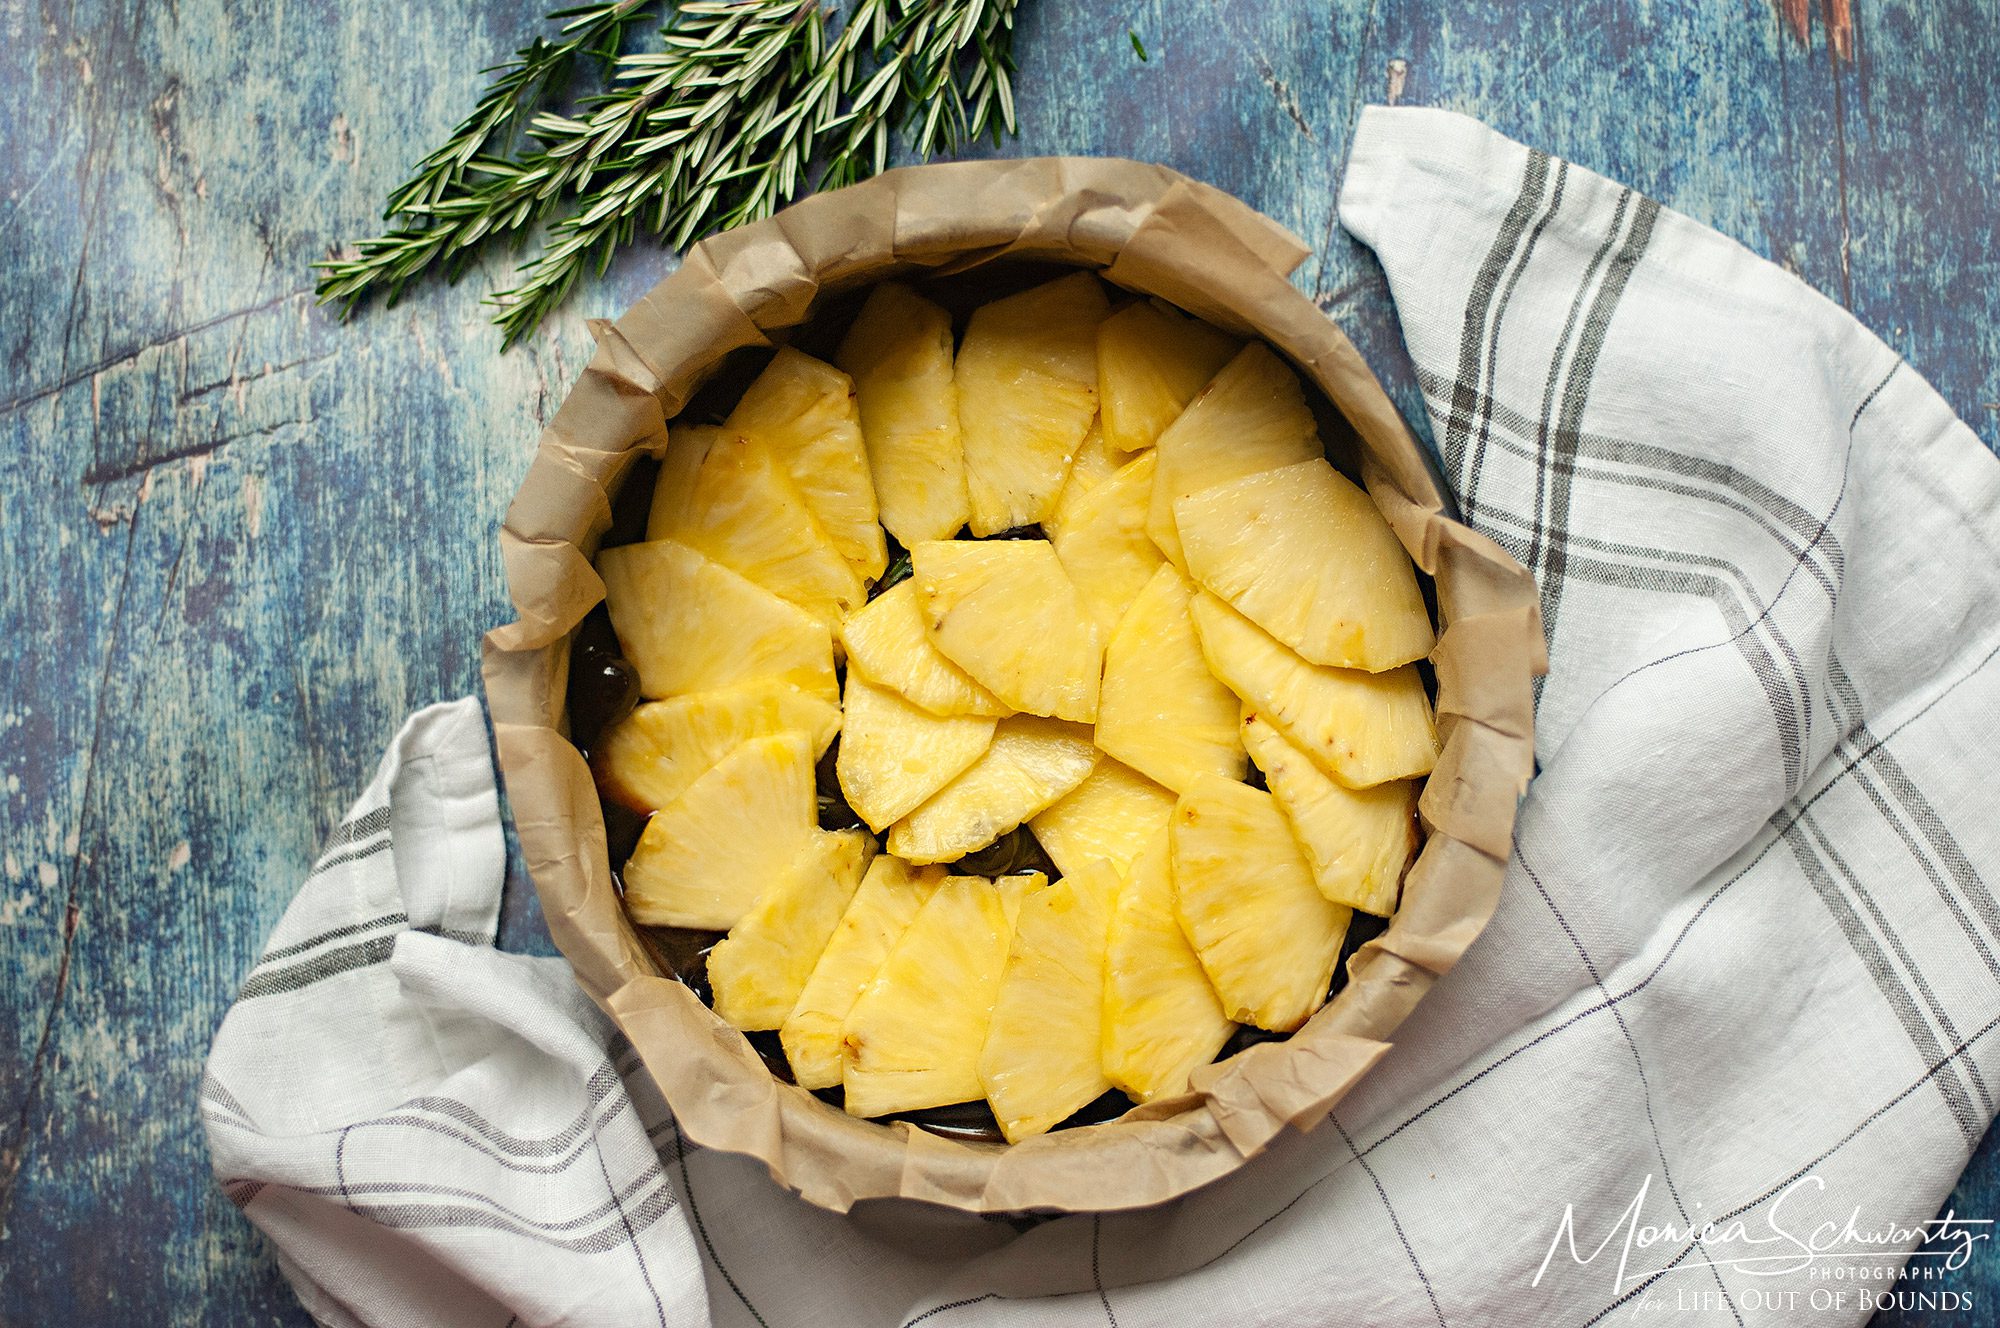 Layering-pineapple-slices-for-pineapple-upsidedown-cake-with-rosemary